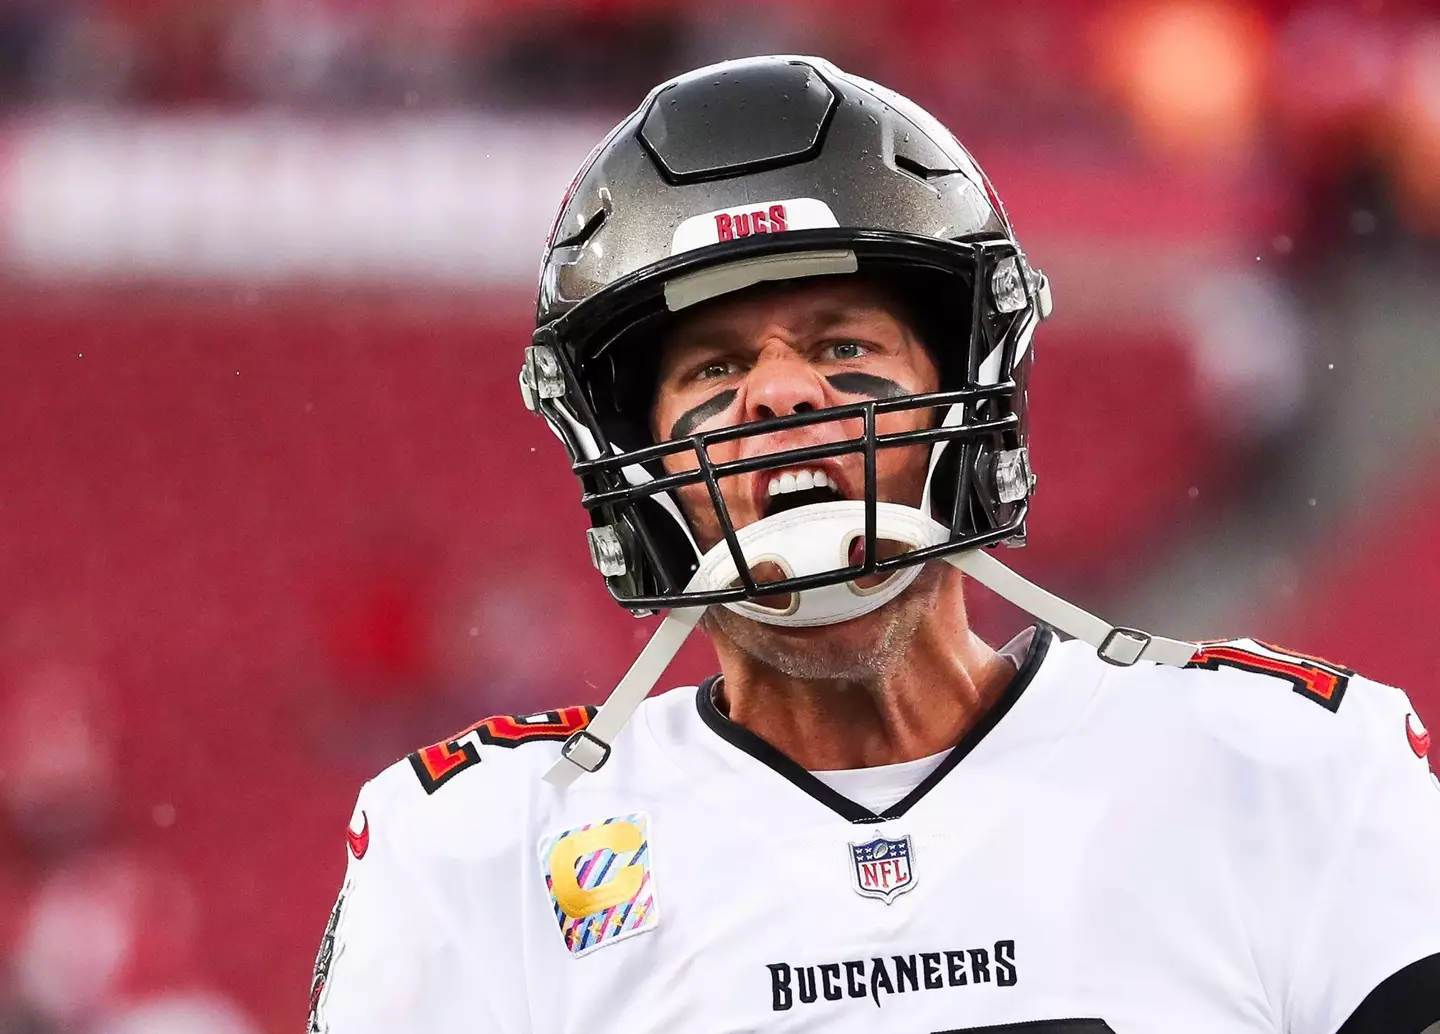 Tampa Bay Buccaneers superstar Tom Brady could sign for the Las Vegas Raiders, according to Colin Cowherd.